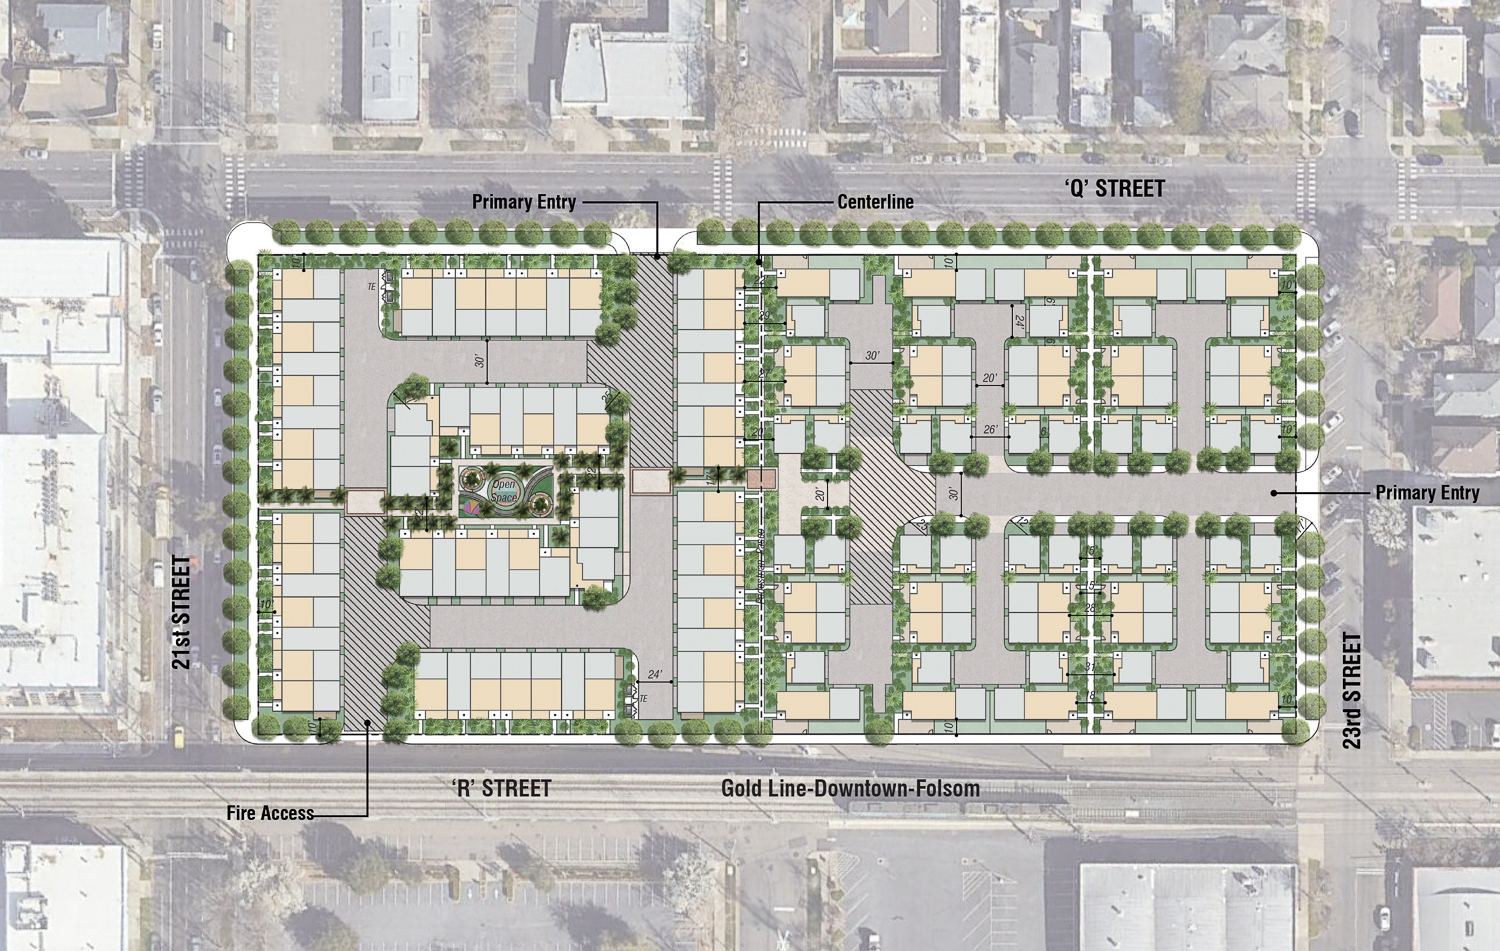 2100 Q Street site map, illustration by TCA Architects